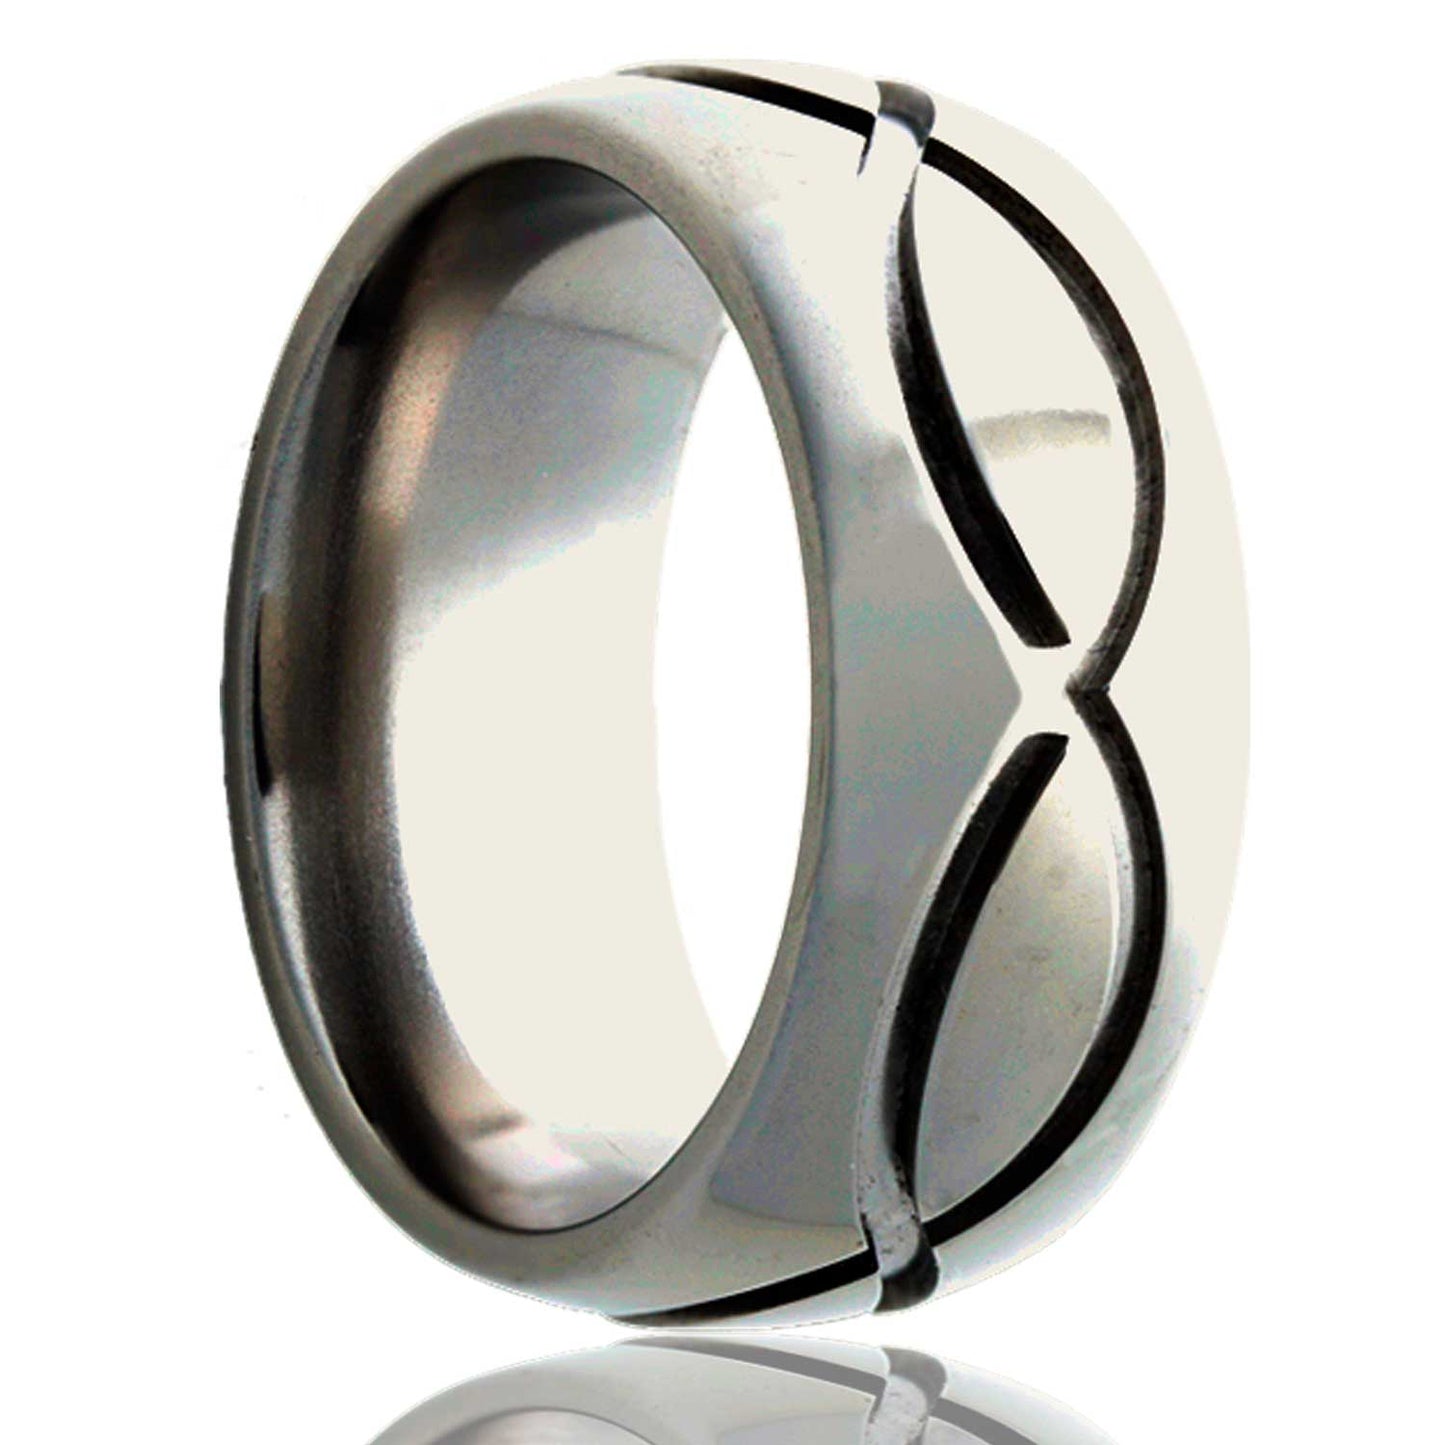 A infinity waves domed platinum wedding band displayed on a neutral white background.